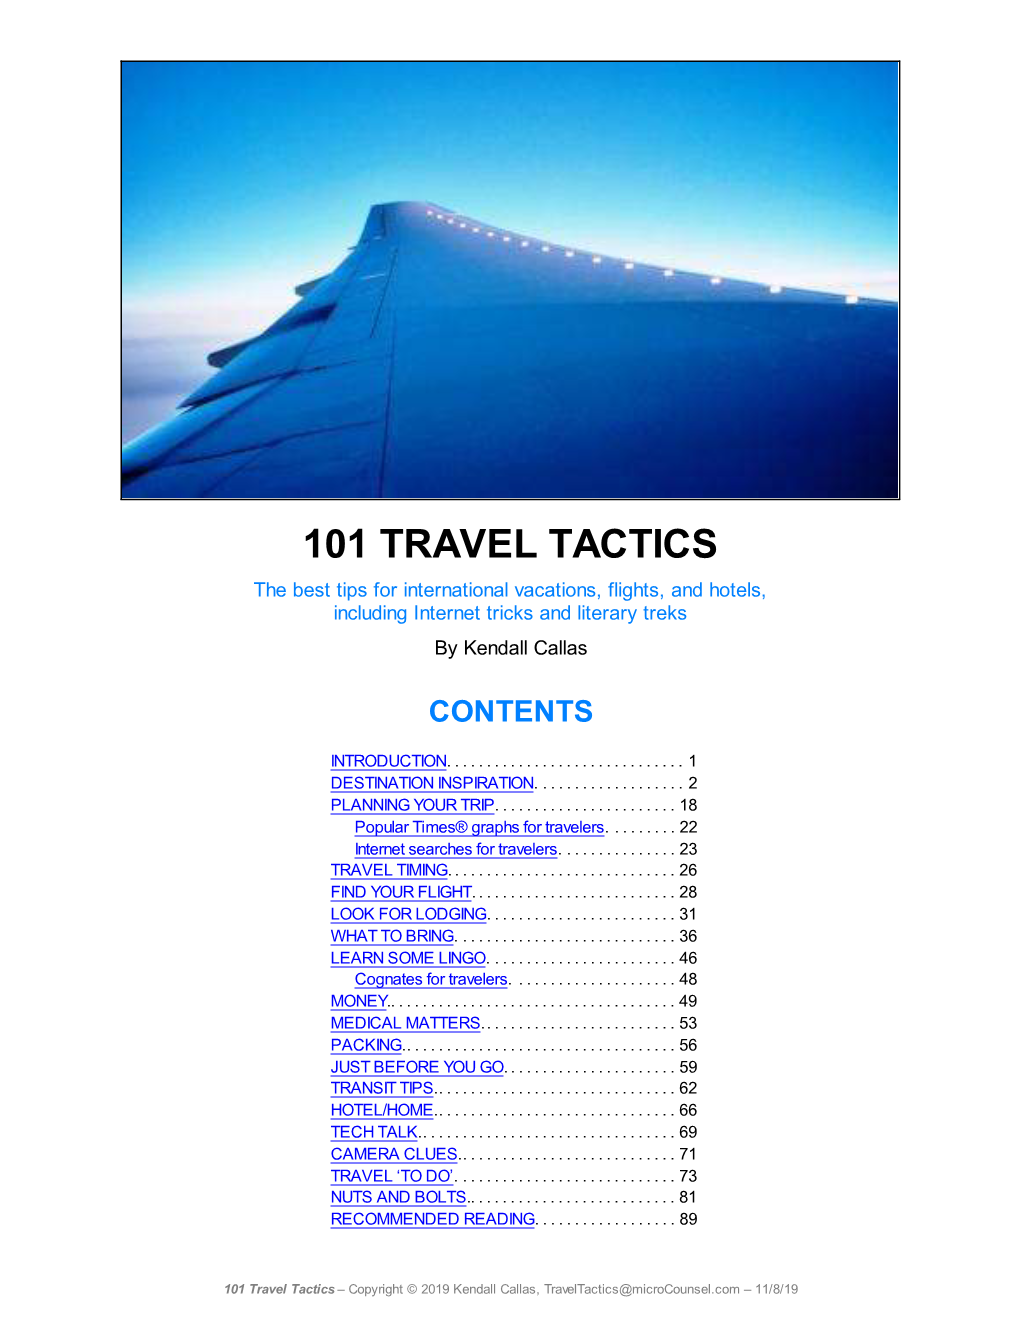 101 TRAVEL TACTICS the Best Tips for International Vacations, Flights, and Hotels, Including Internet Tricks and Literary Treks by Kendall Callas